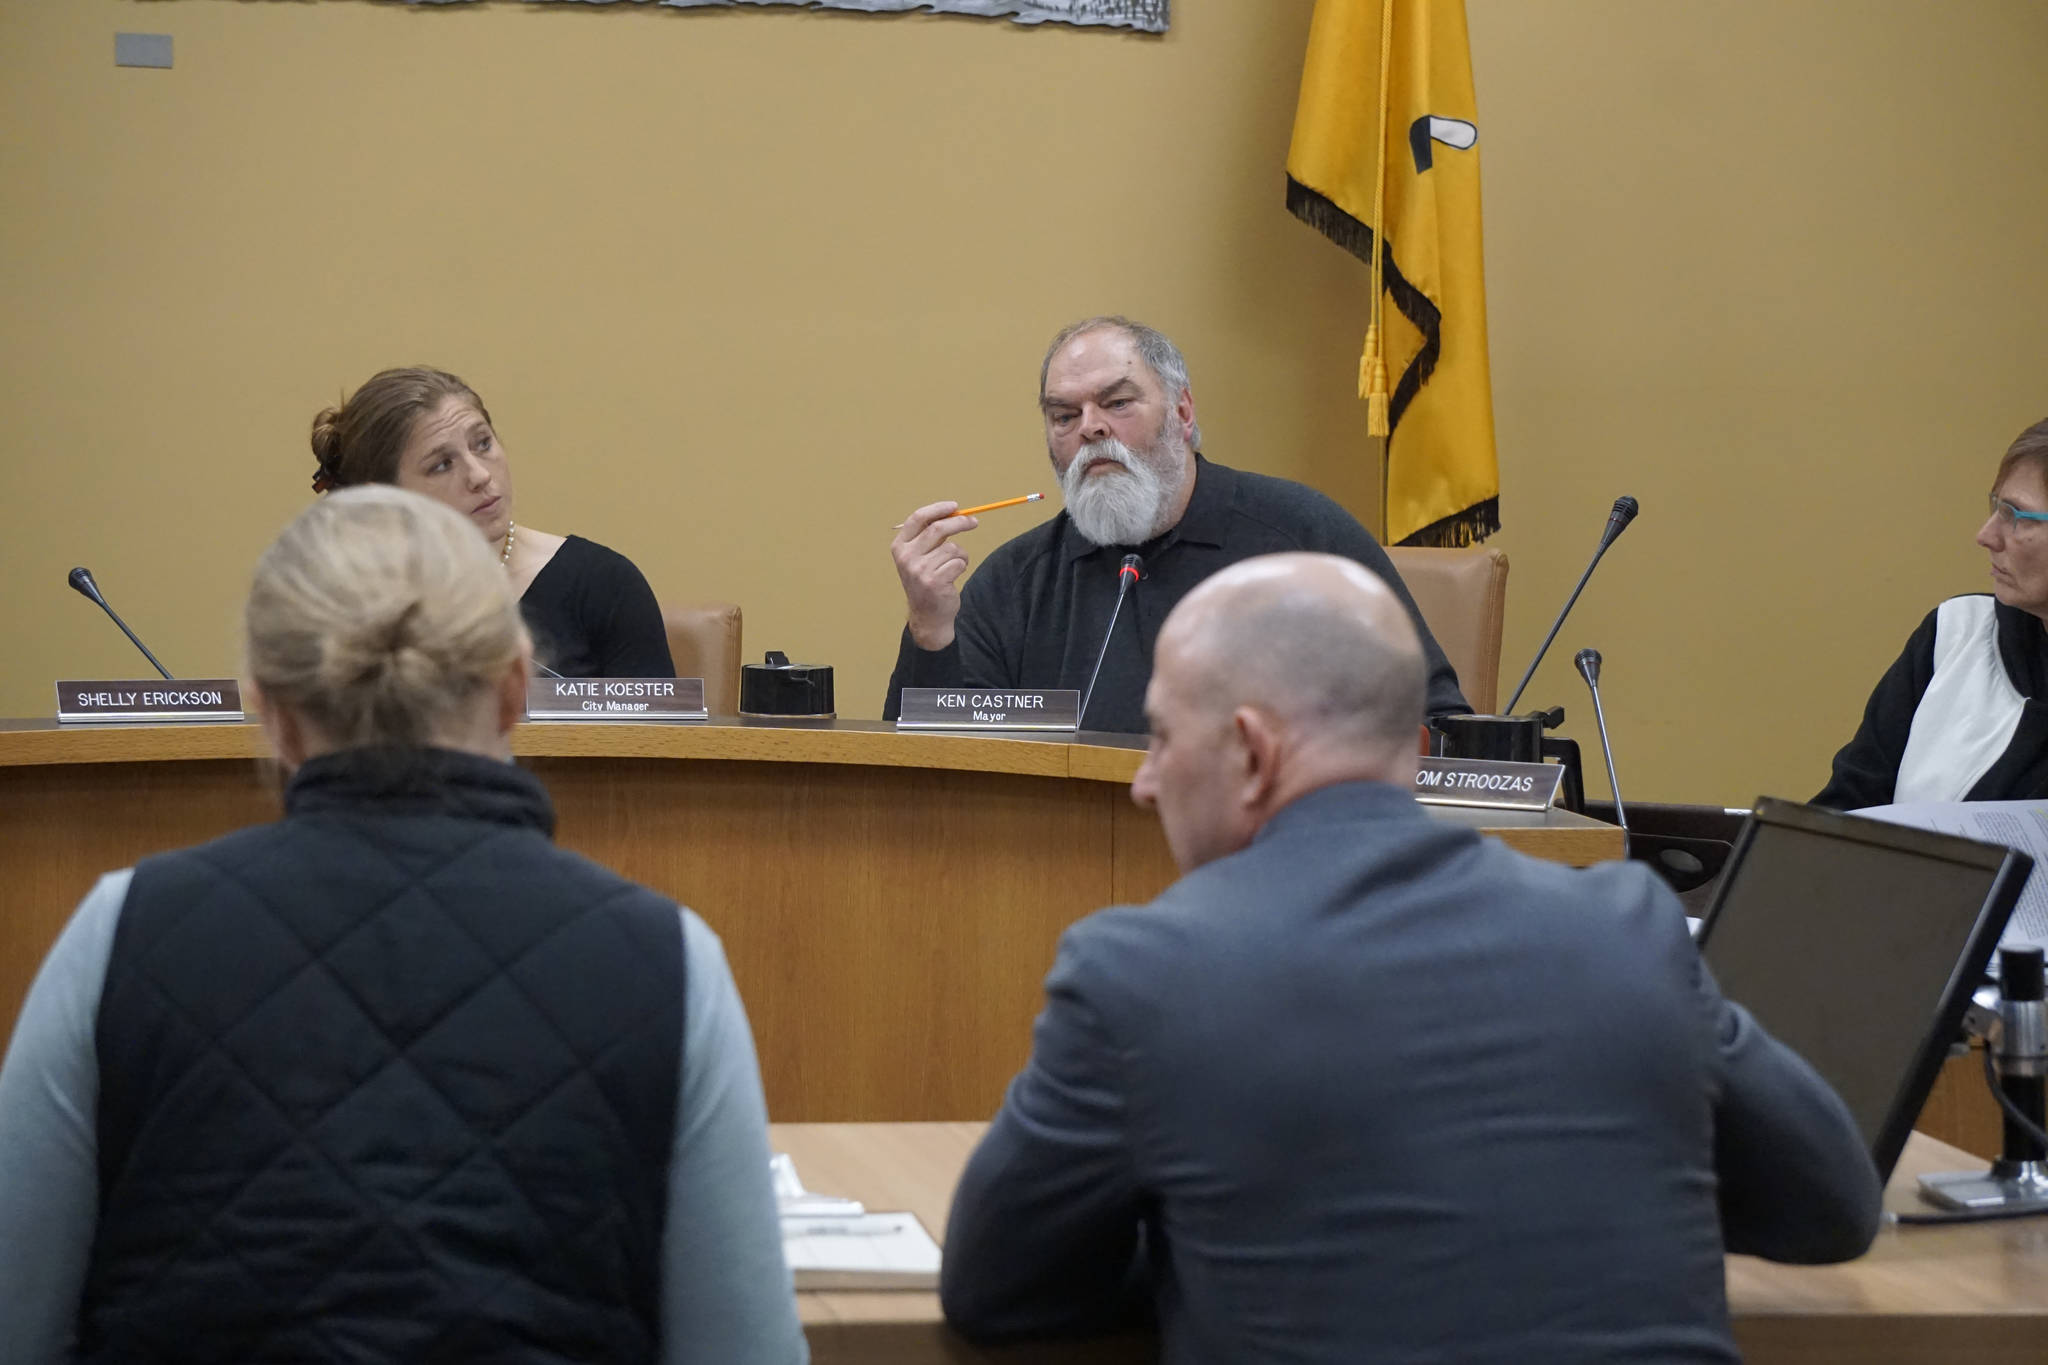 Homer Mayor Ken Castner, center, questions ENSTAR Natural Gas officials Lindsay Hobson, left, foreground, and David Bell at the Feb. 11, 2019 Homer City Council meeting in Homer, Alaska. (Photo by Michael Armstrong/Homer News)